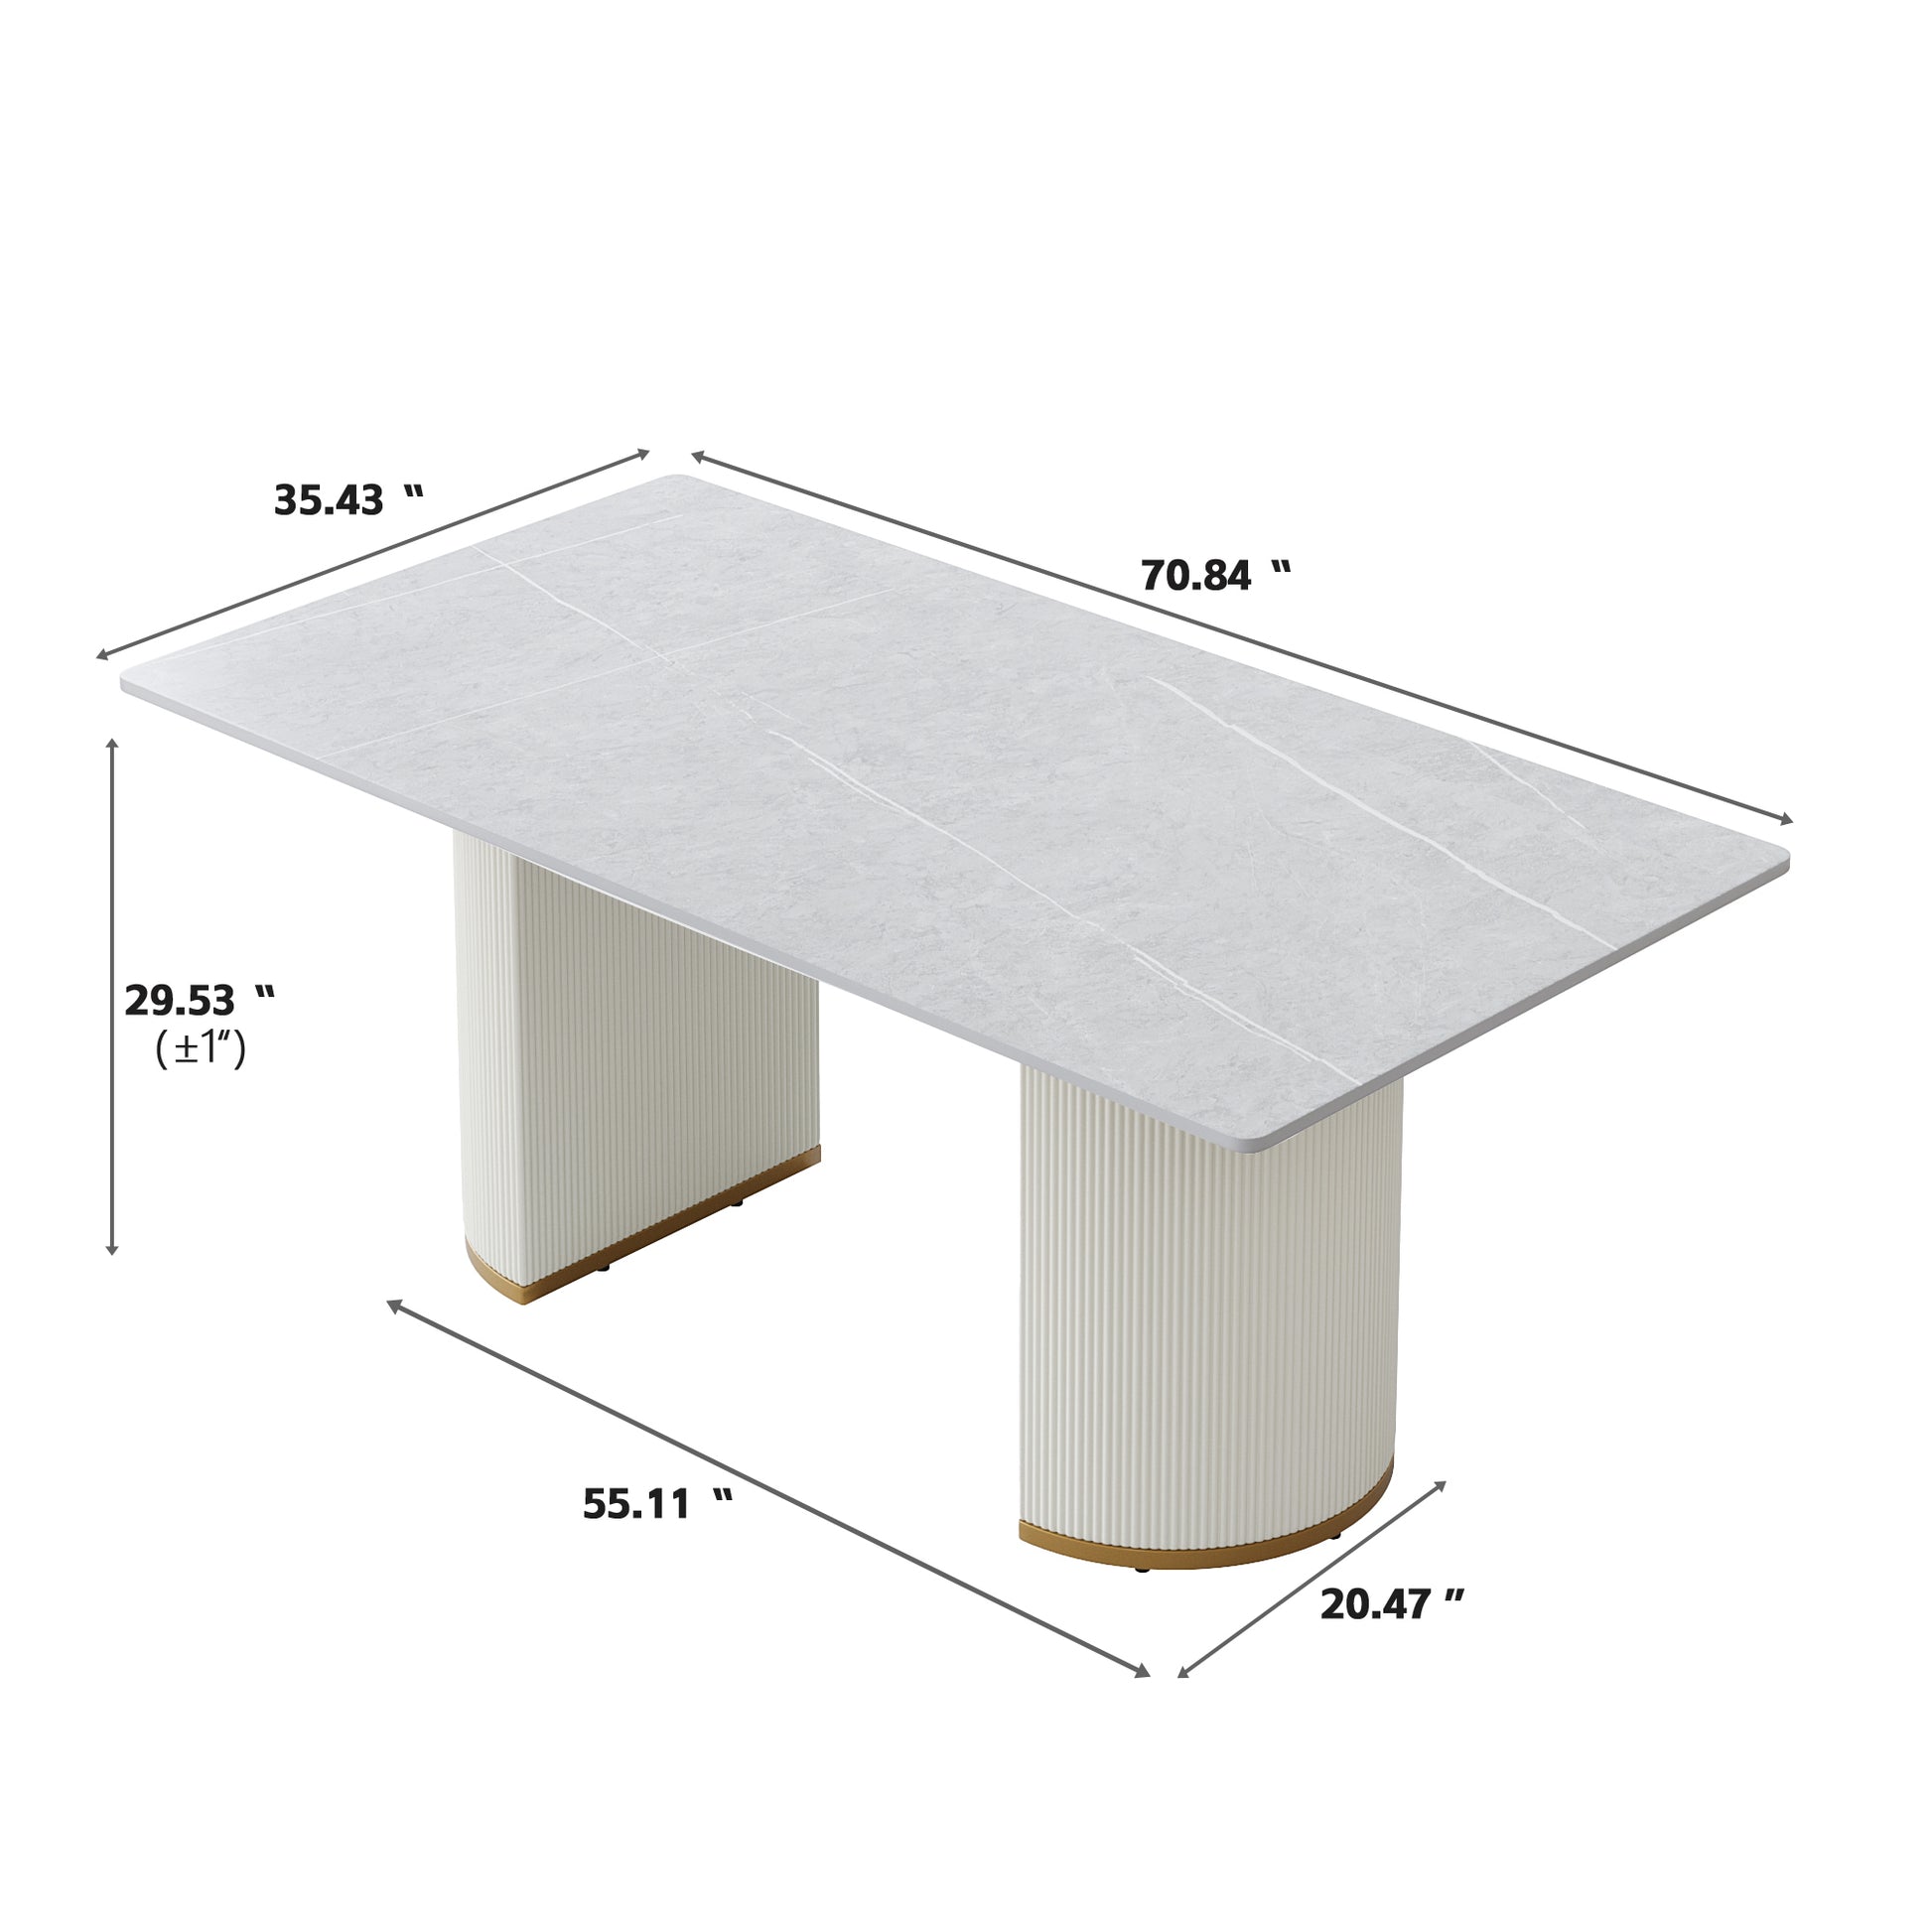 70.84 "modern artificial stone gray panel beige PU plywood legs-can accommodate 6-8 people. - Enova Luxe Home Store